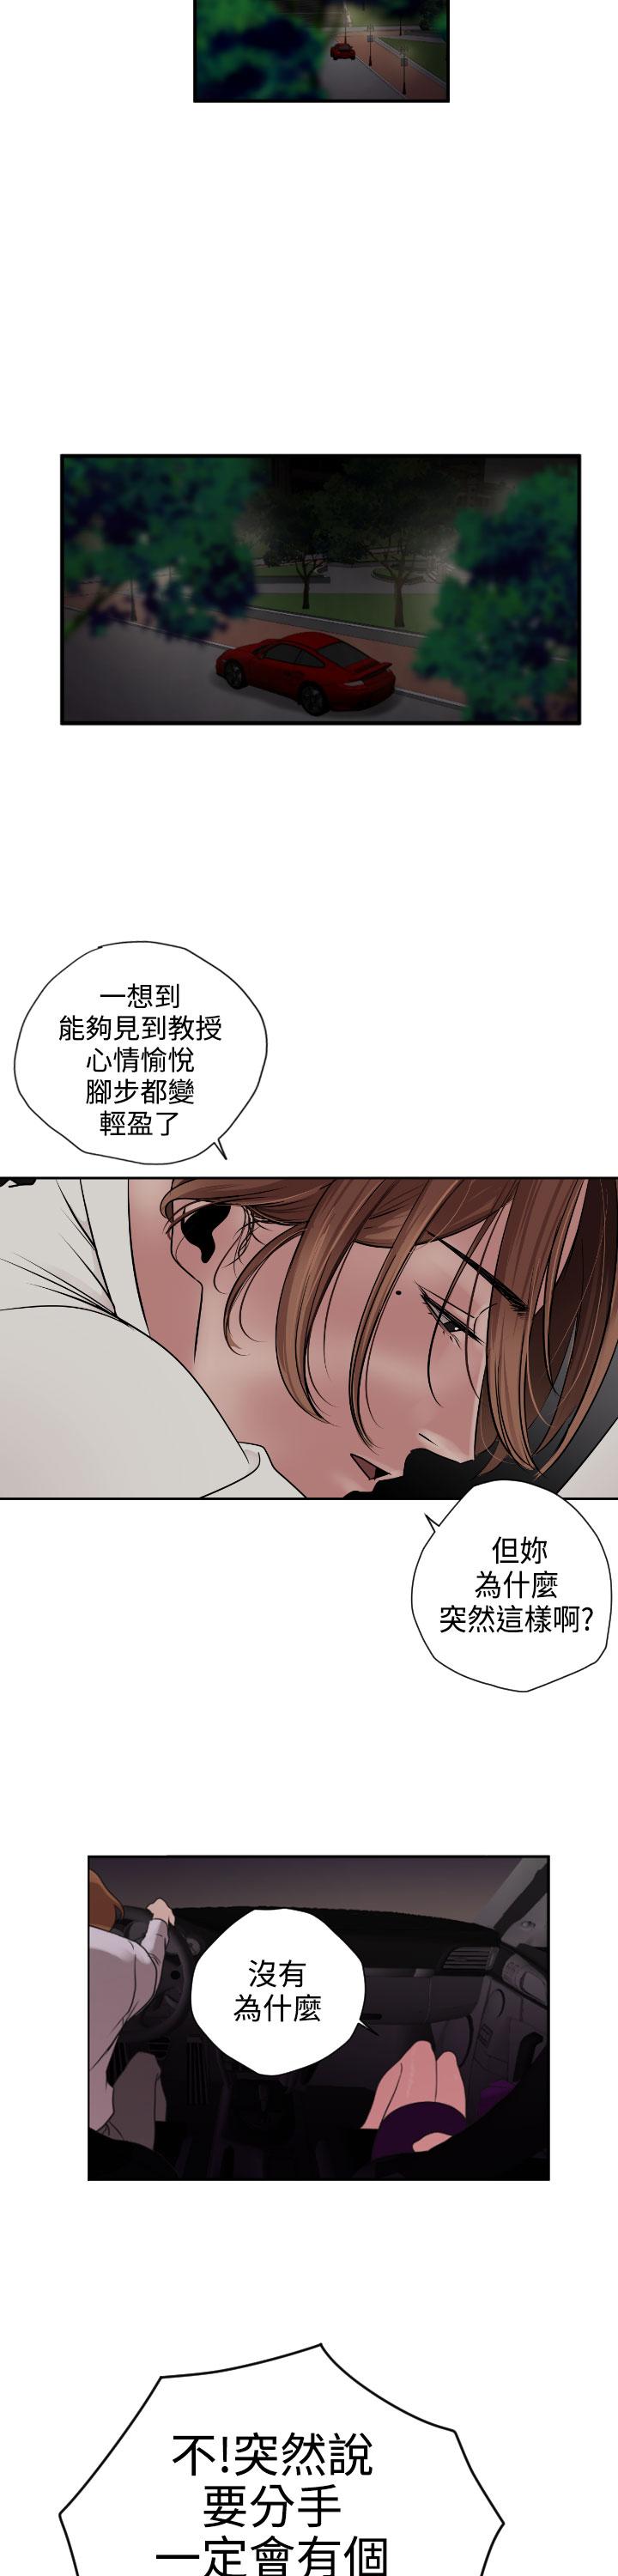 Desire King (慾求王) Ch.1-4 (chinese) 73